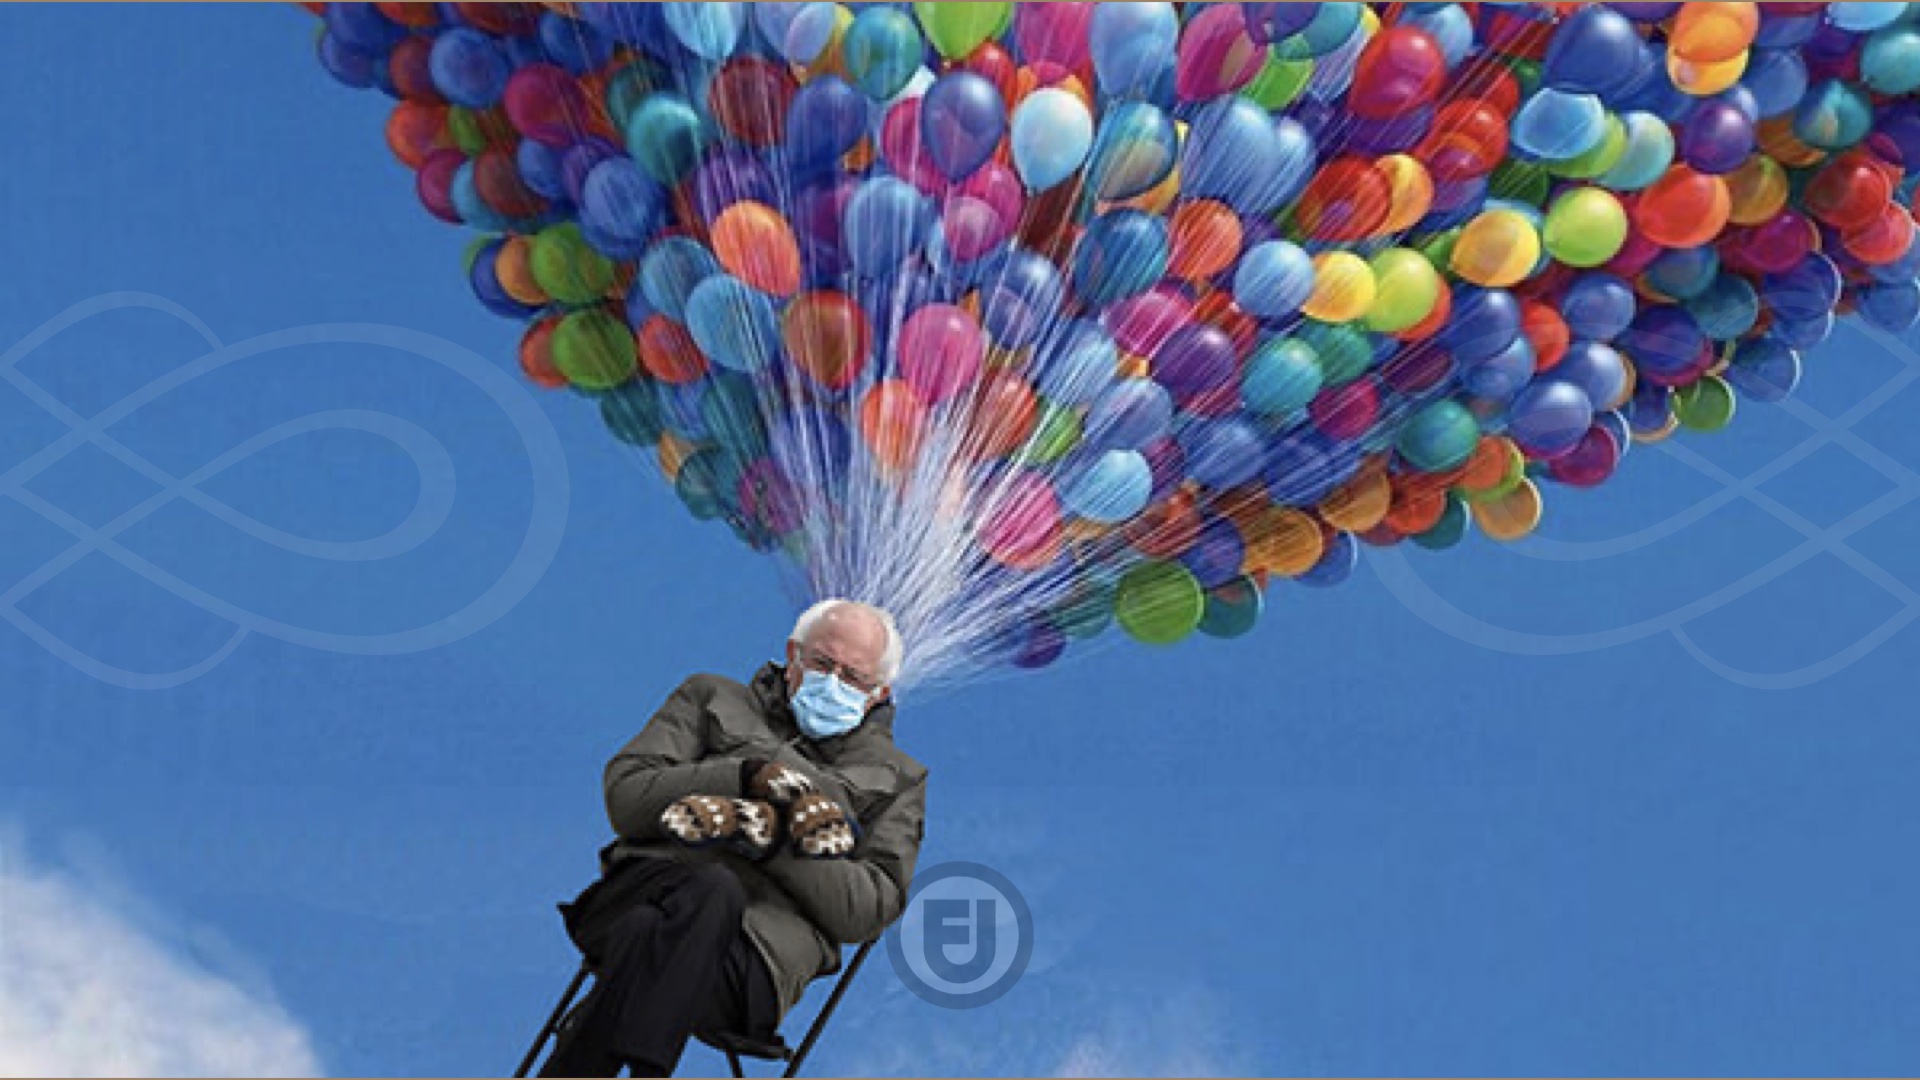 Colorful image of Bernie Sanders wearing his mittens sitting on a chair that is being lifted up by many balloons a la the moveie UP. No text.